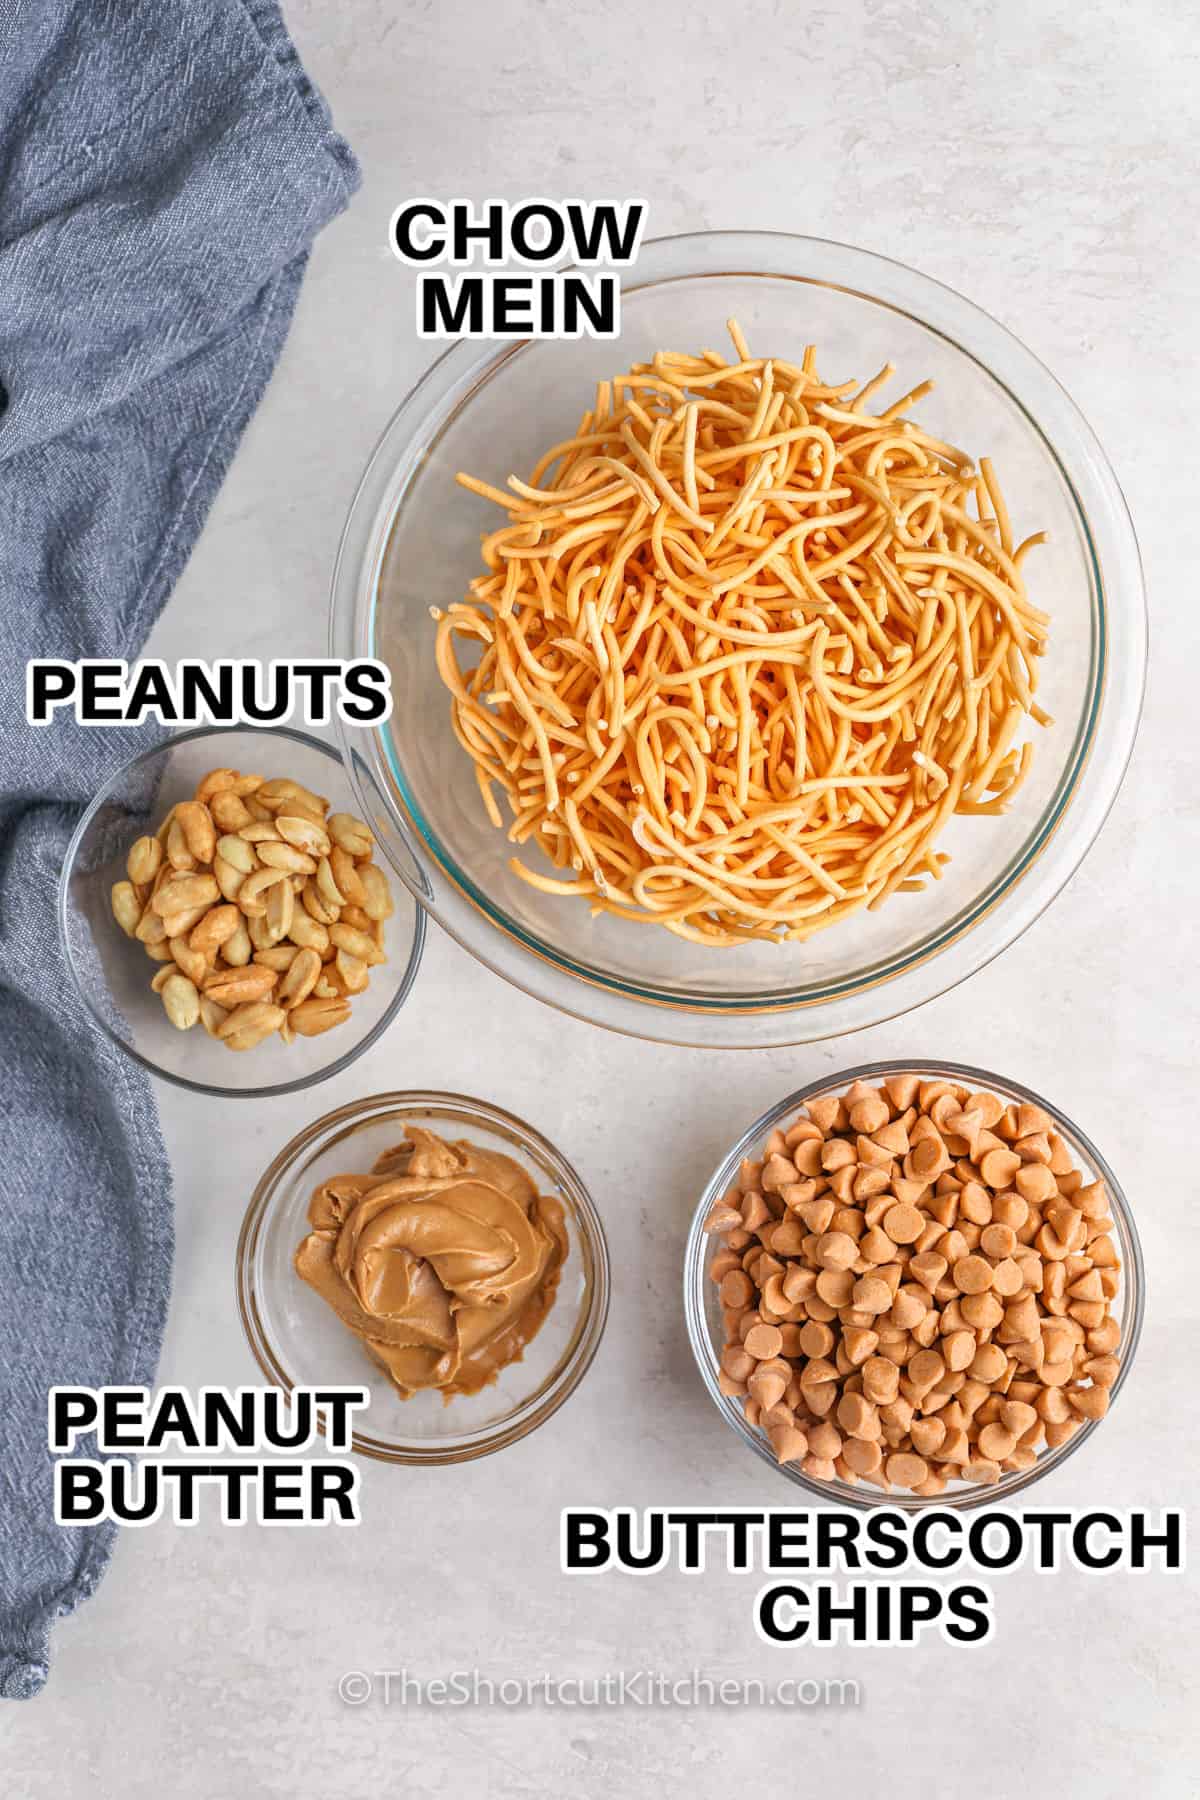 peanut butter , peanuts , chow mein , butterscotch chips in bowls to make Butterscotch Haystacks with labels